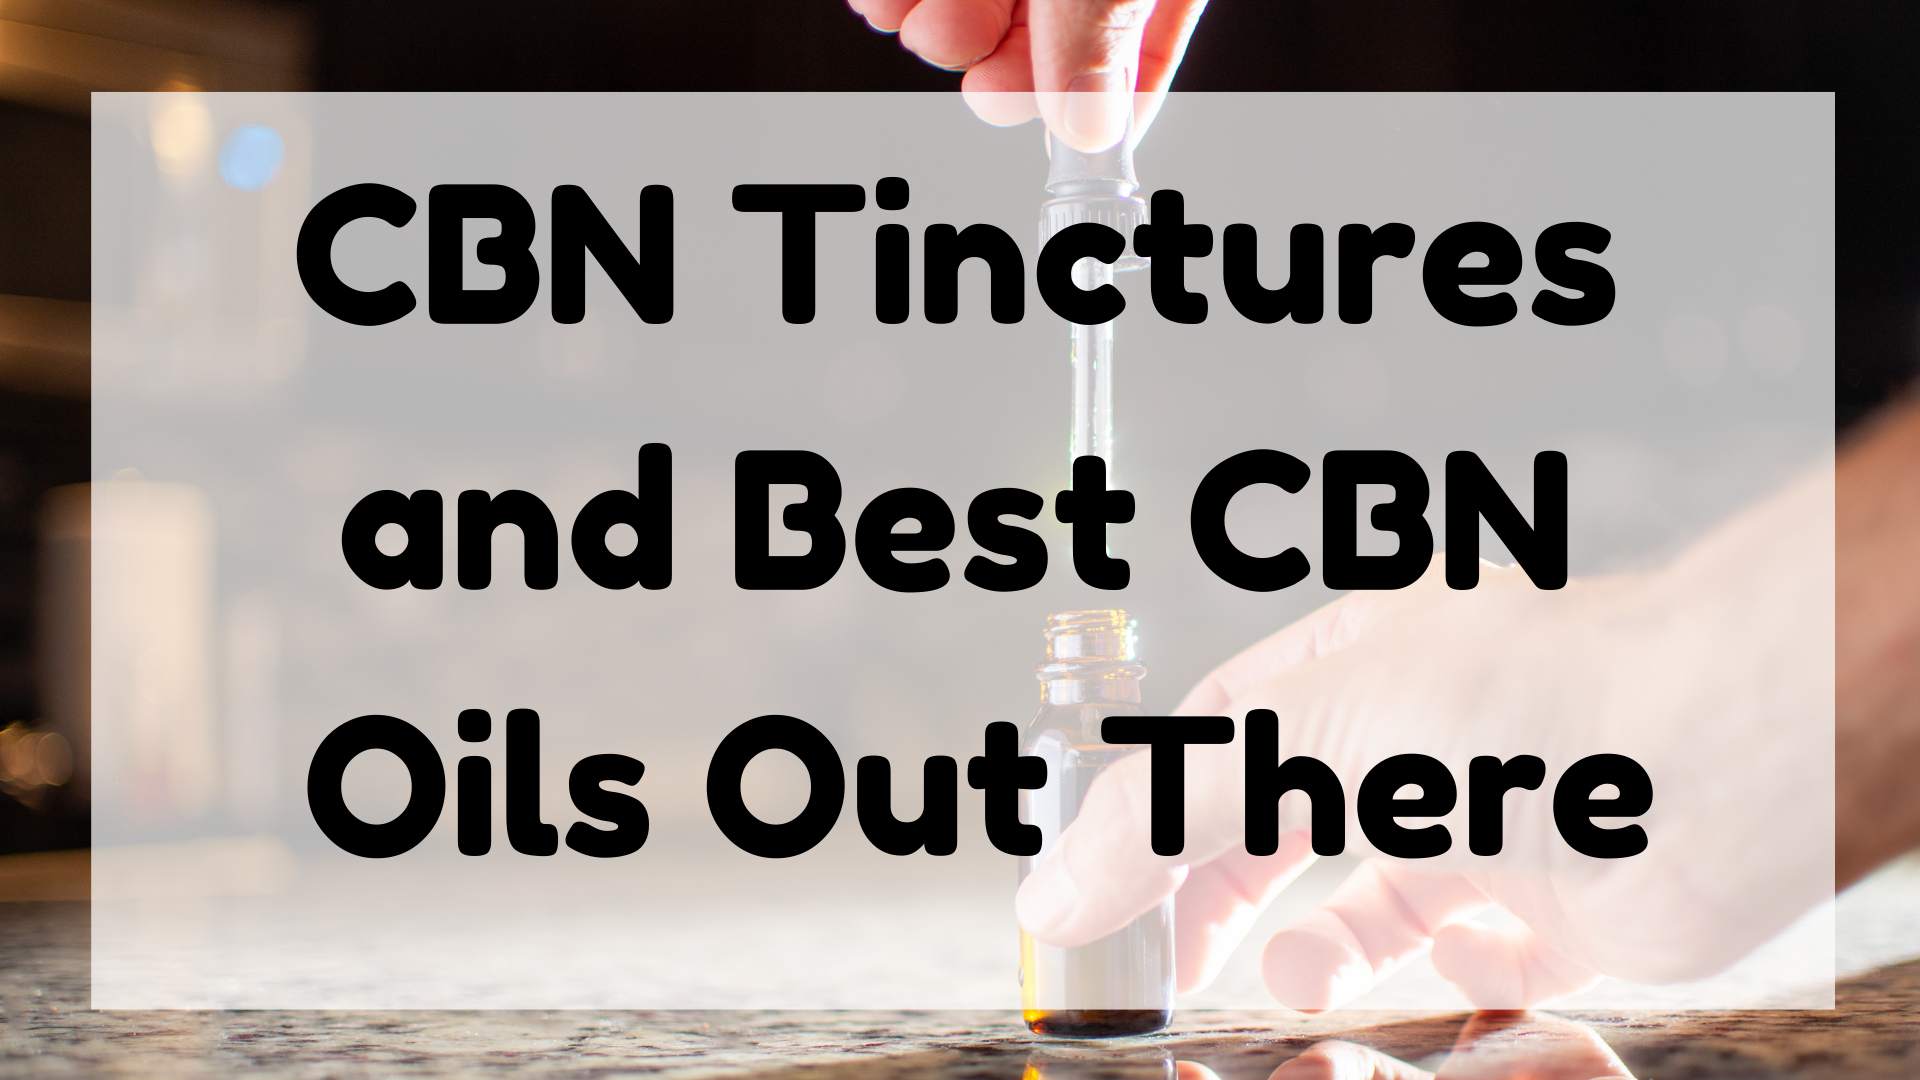 CBN Tinctures featured image